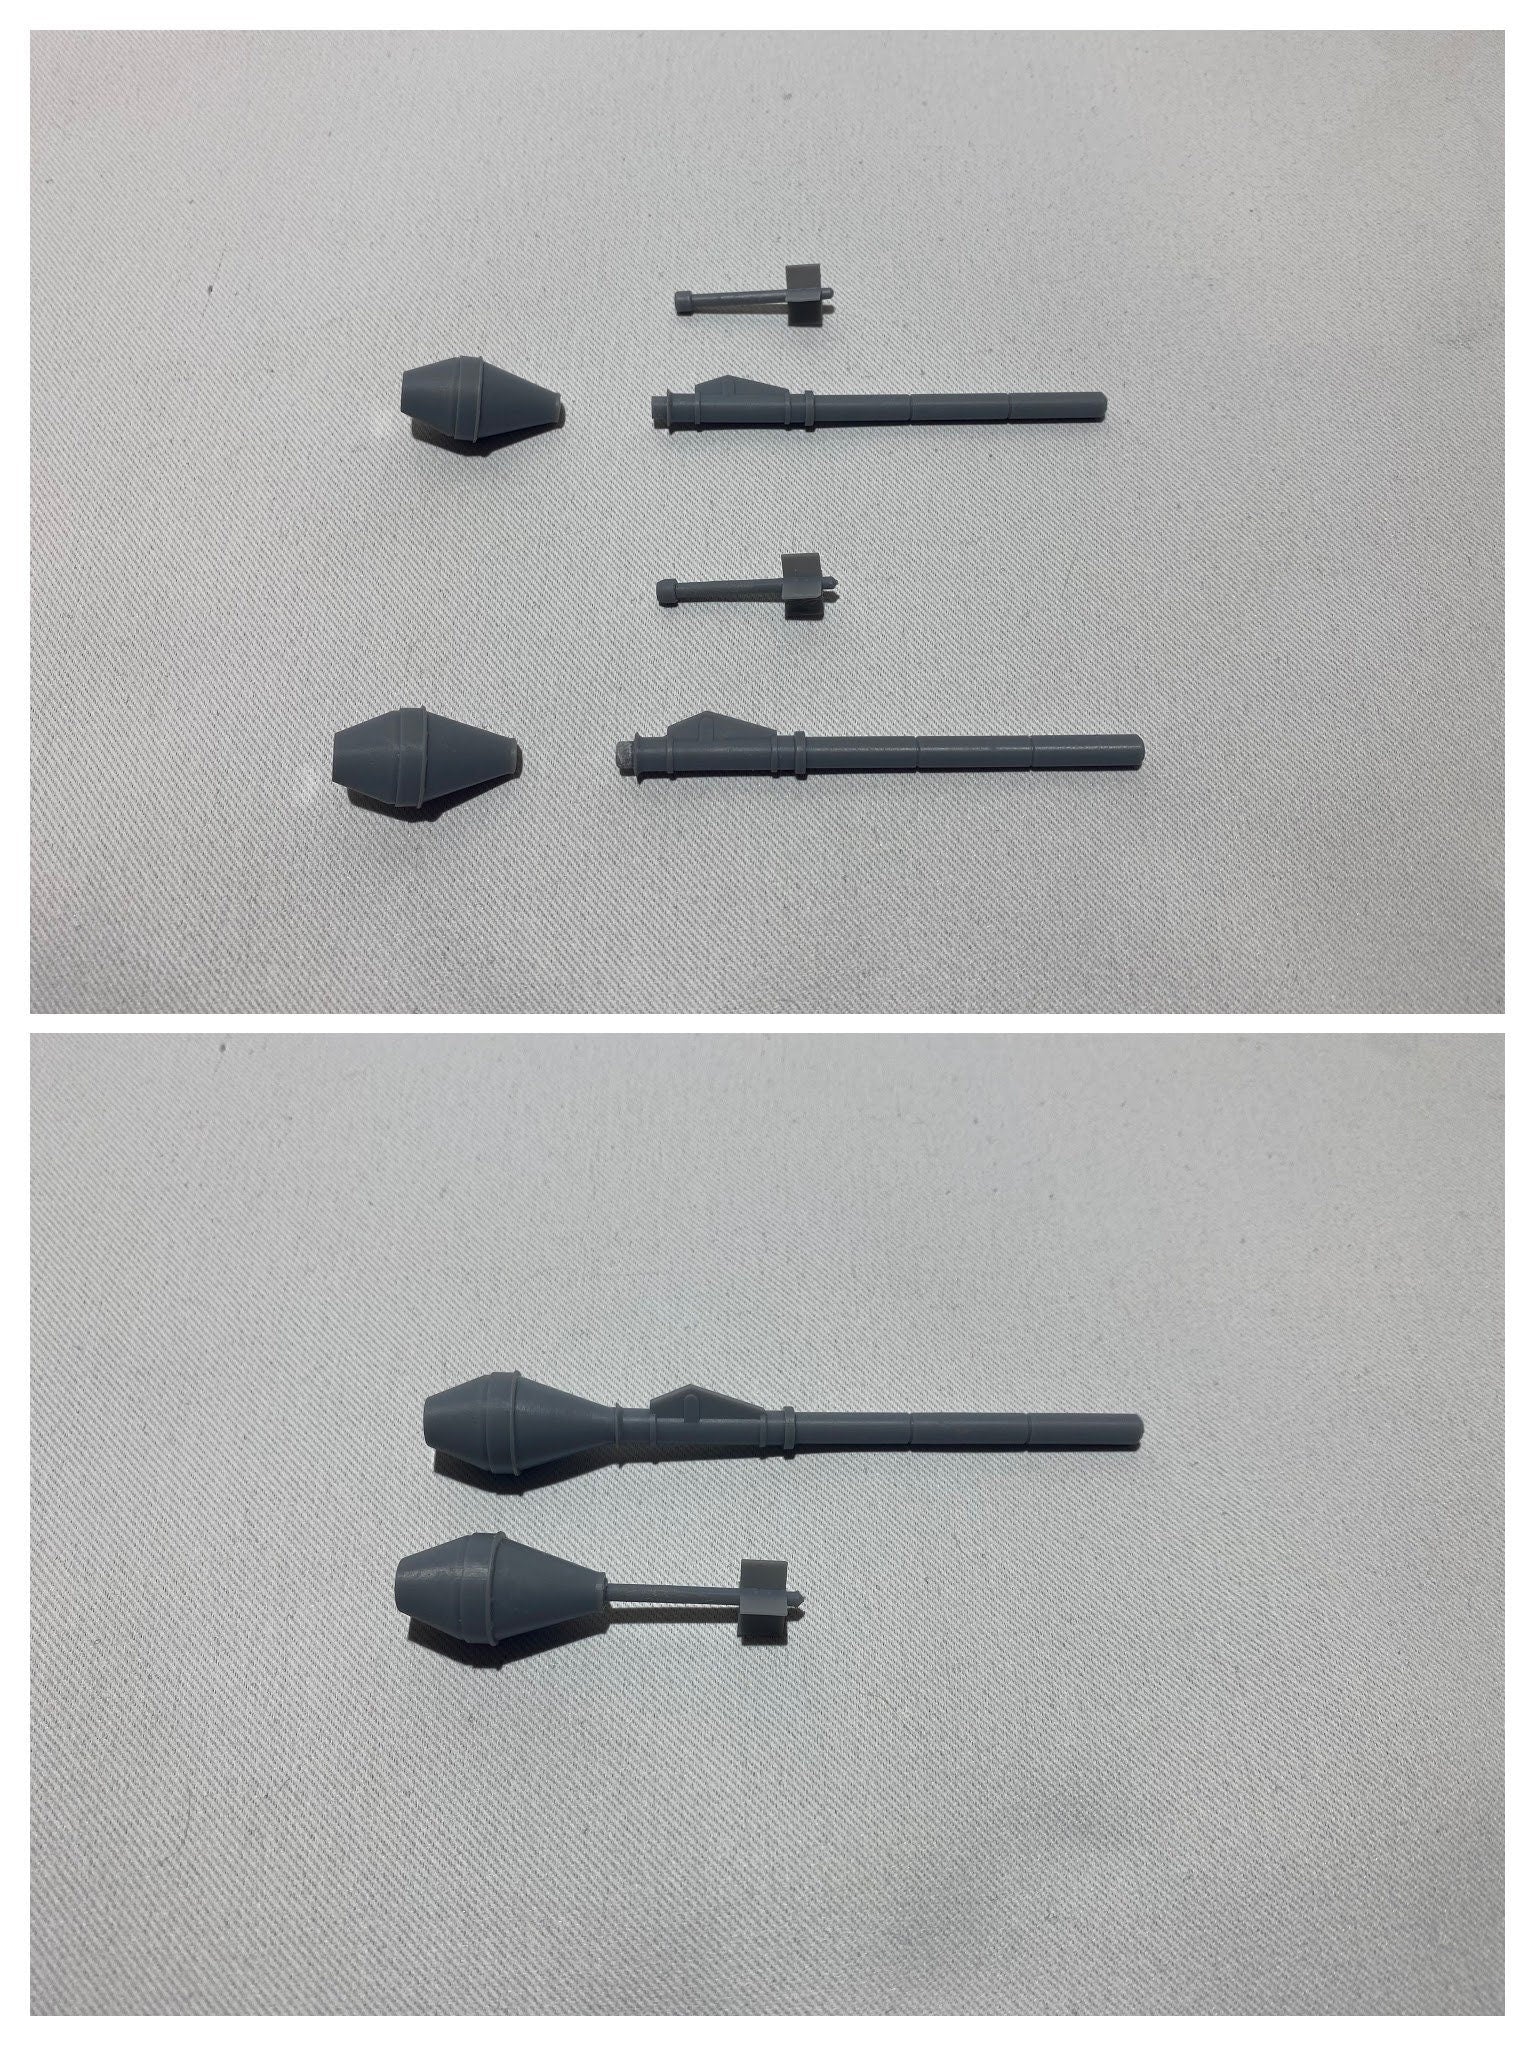 Zeon "One Year War" Weapon Pack 1 (Resin Weapon Set)